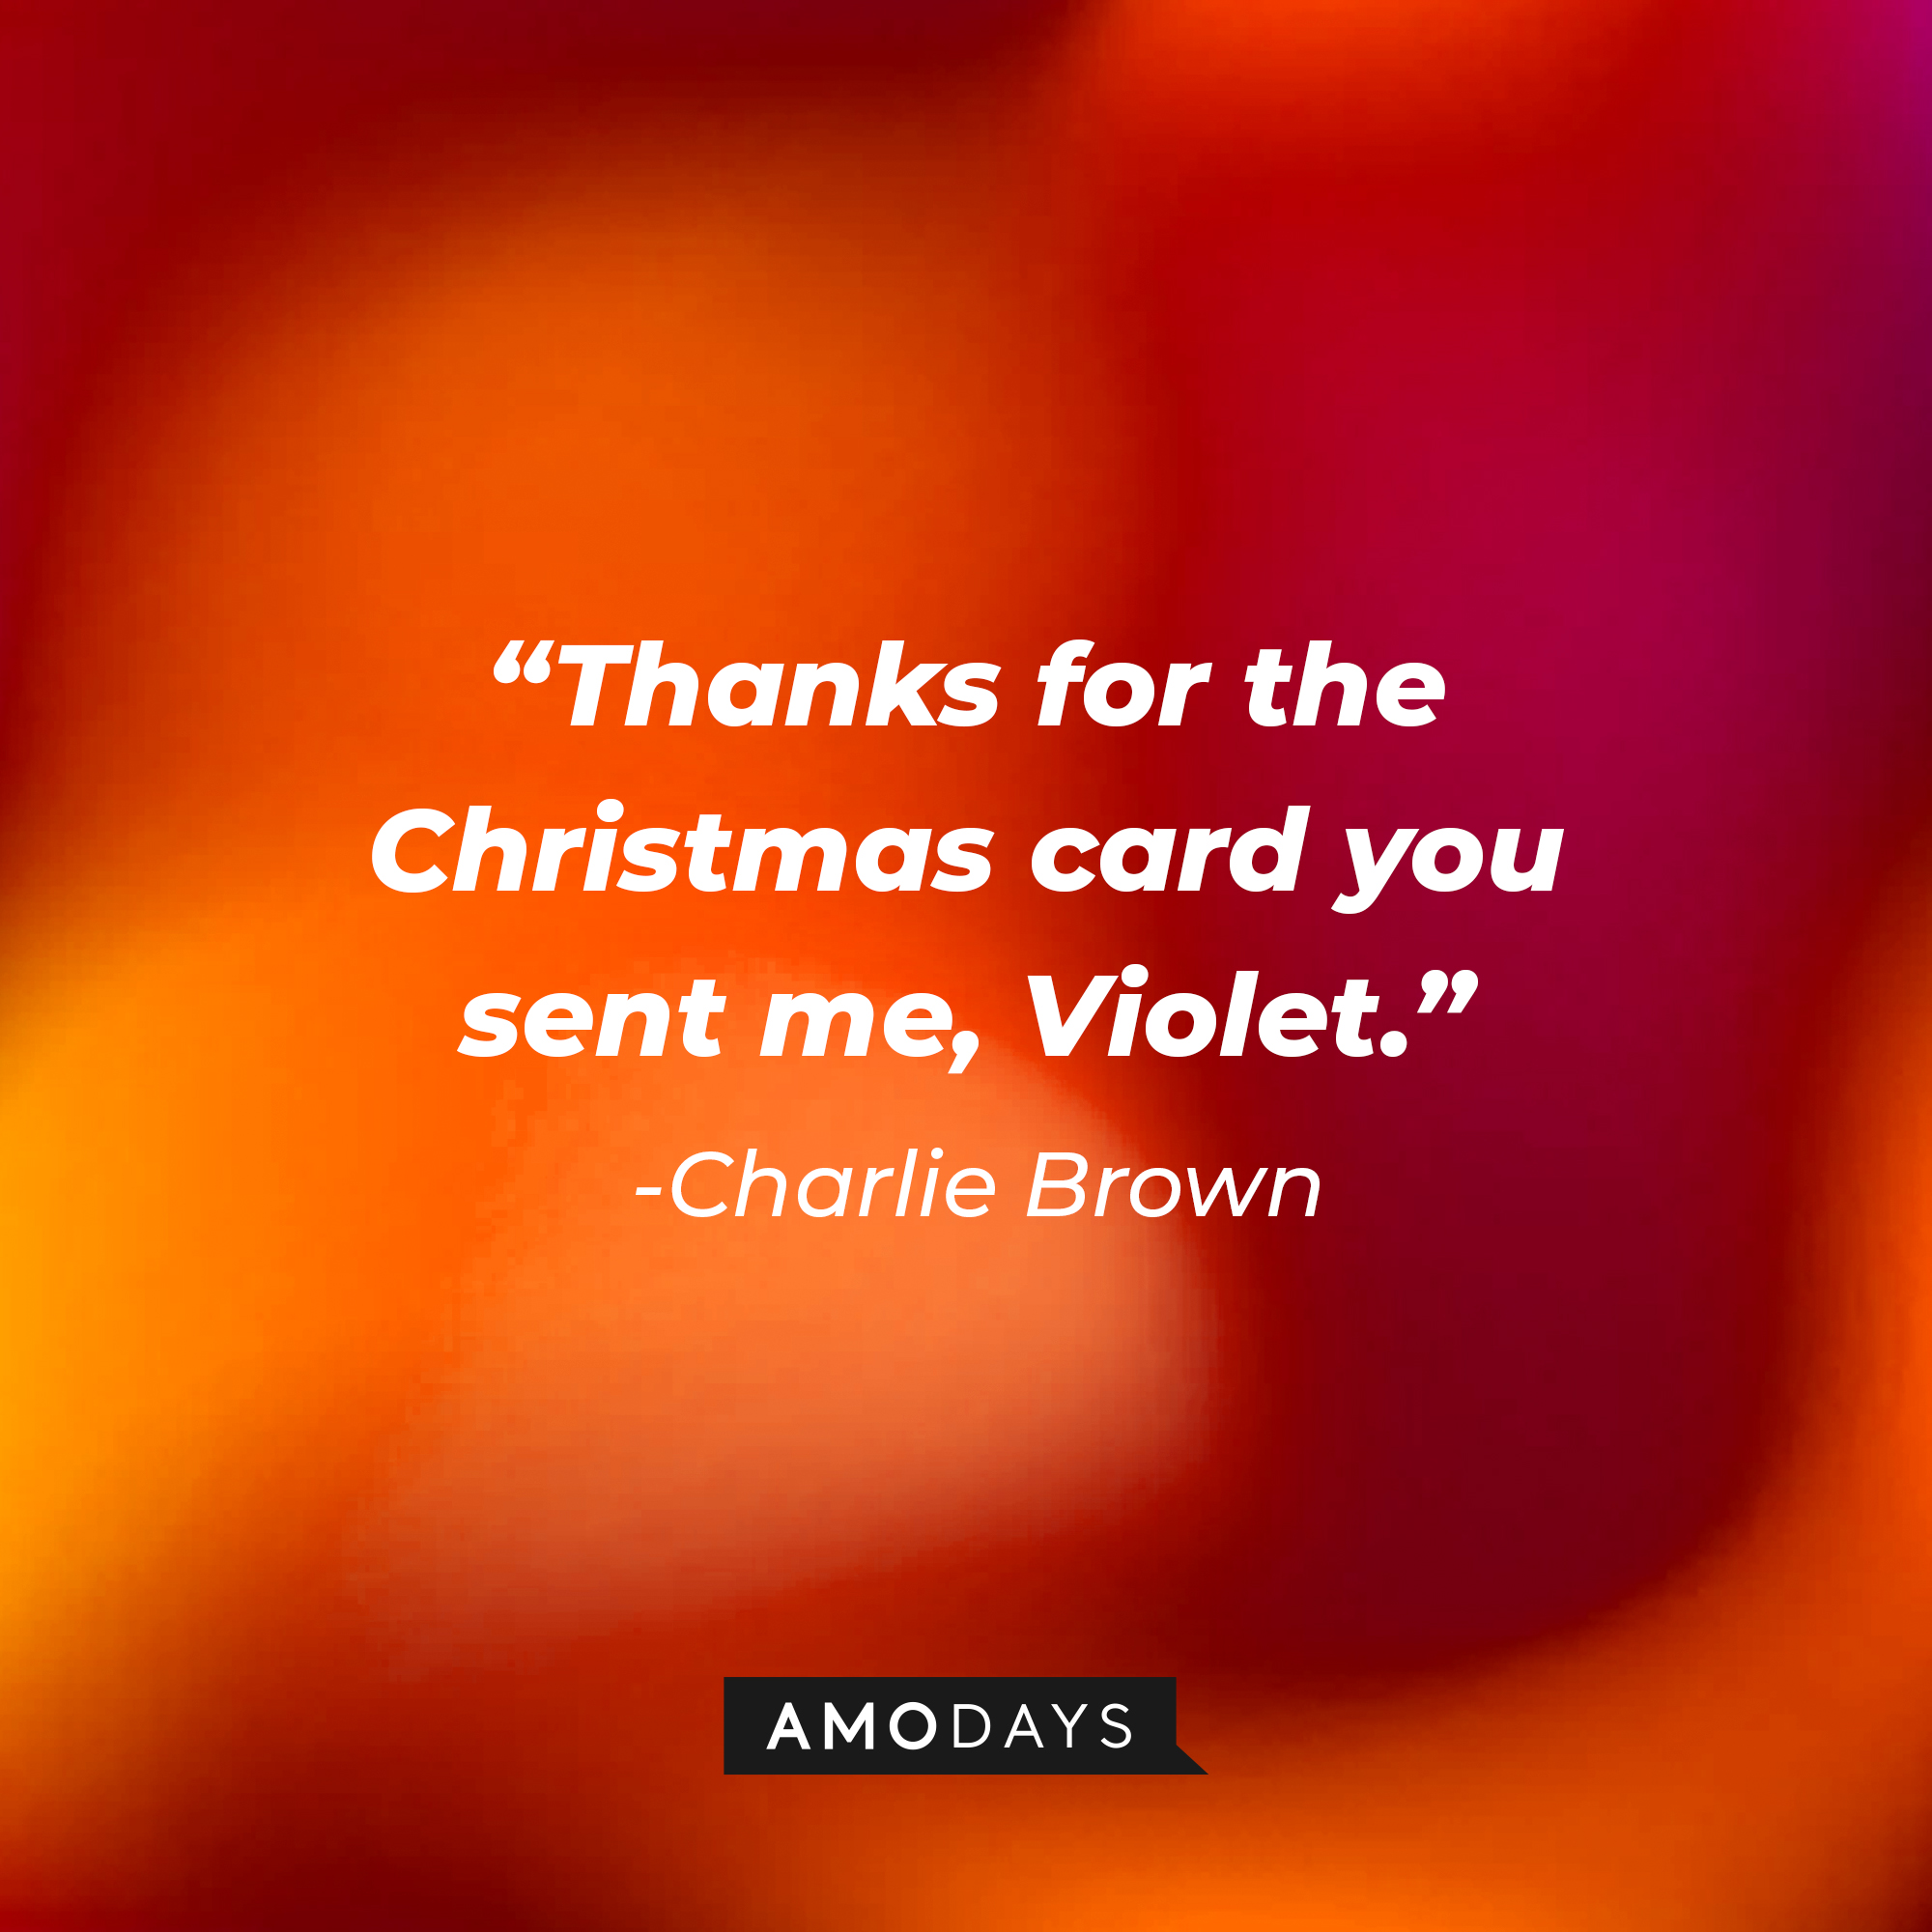 Charlie Brown's quote: "Thanks for the Christmas card you sent me, Violet." | Source: Amodays